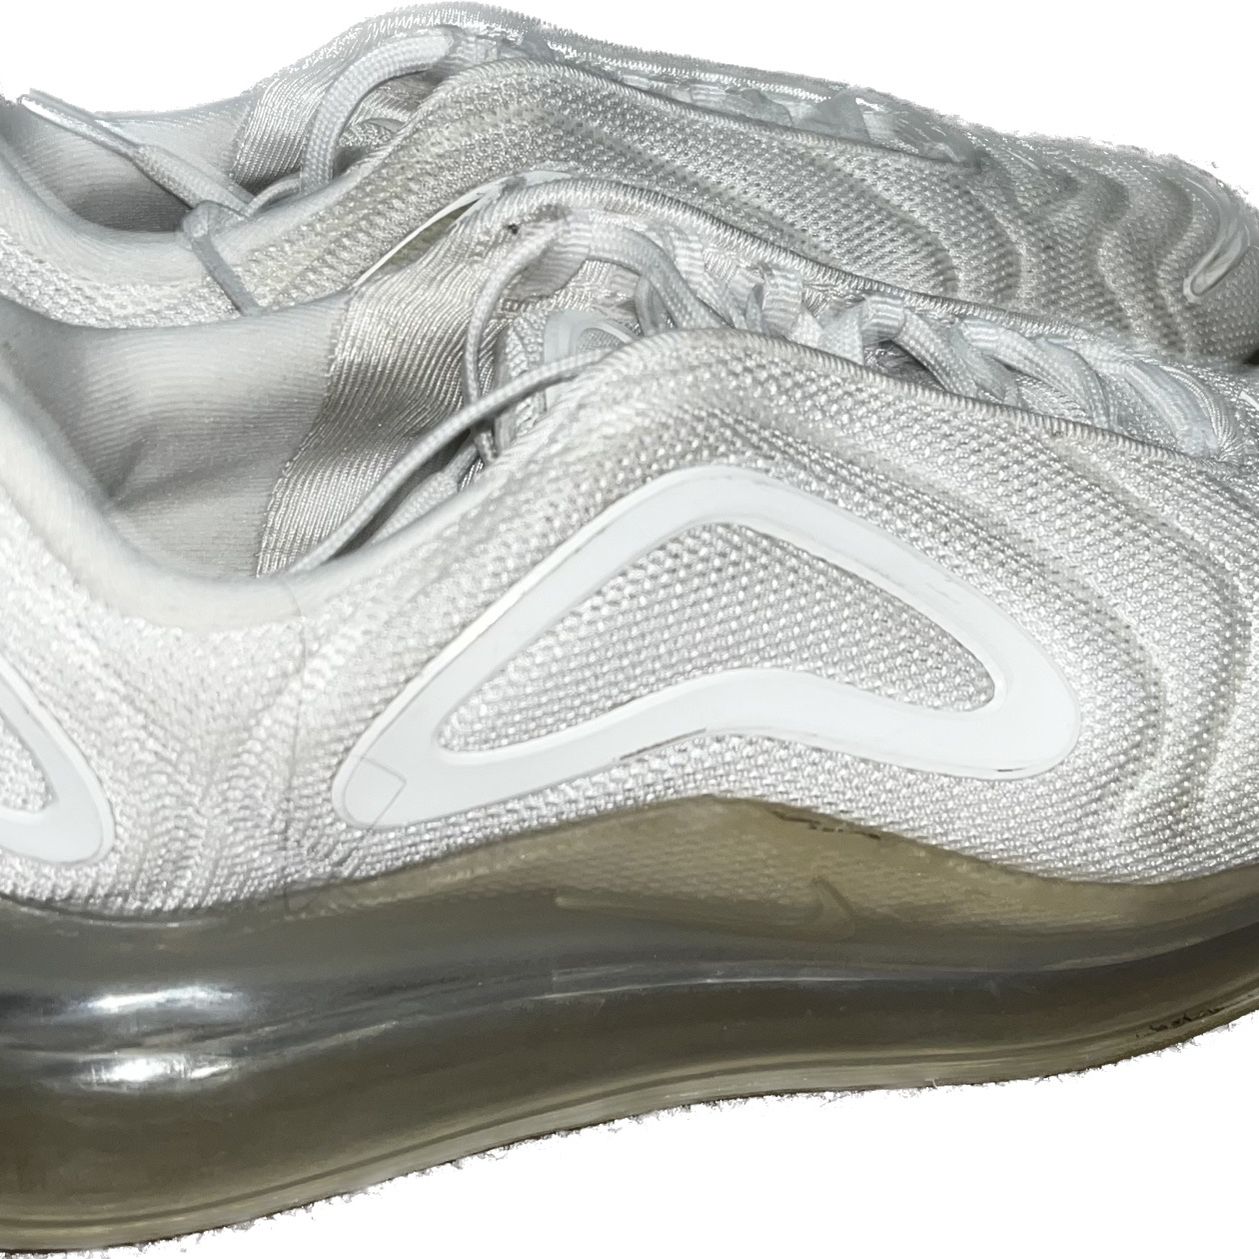 Nike Air Max 720 'Pure Platinum' Make offers for Sale West Linn, OR - OfferUp